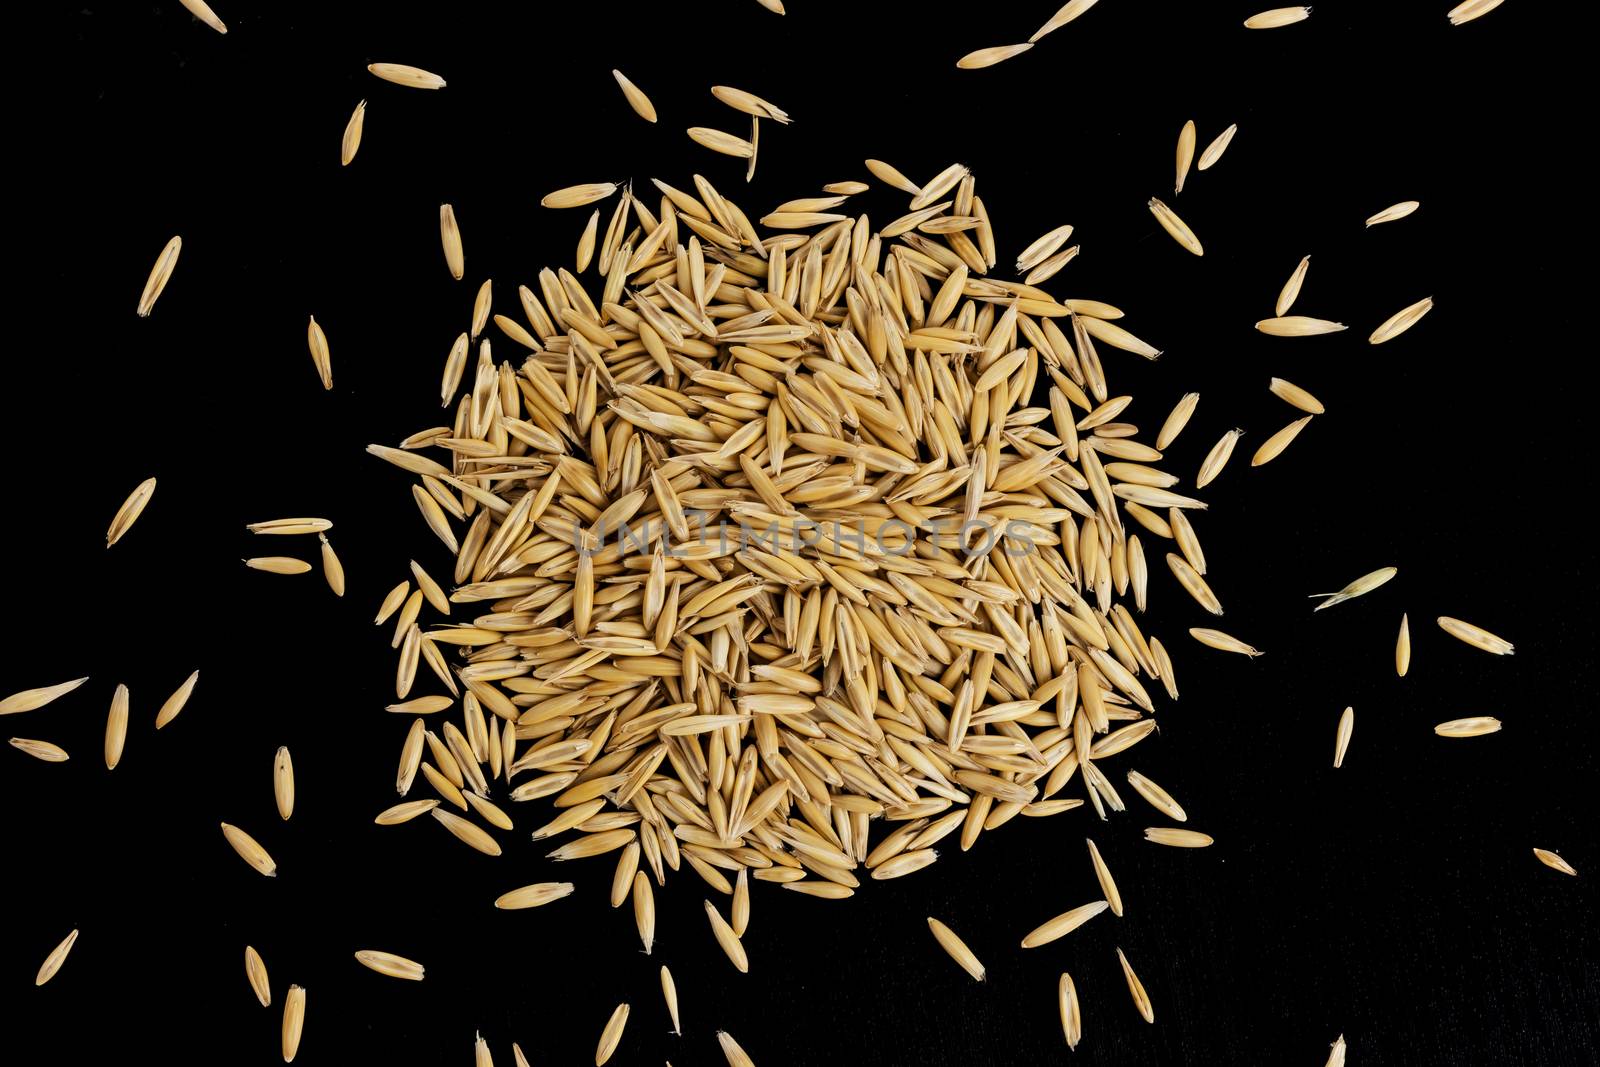 Pile of oat seeds on black background, top view by xamtiw